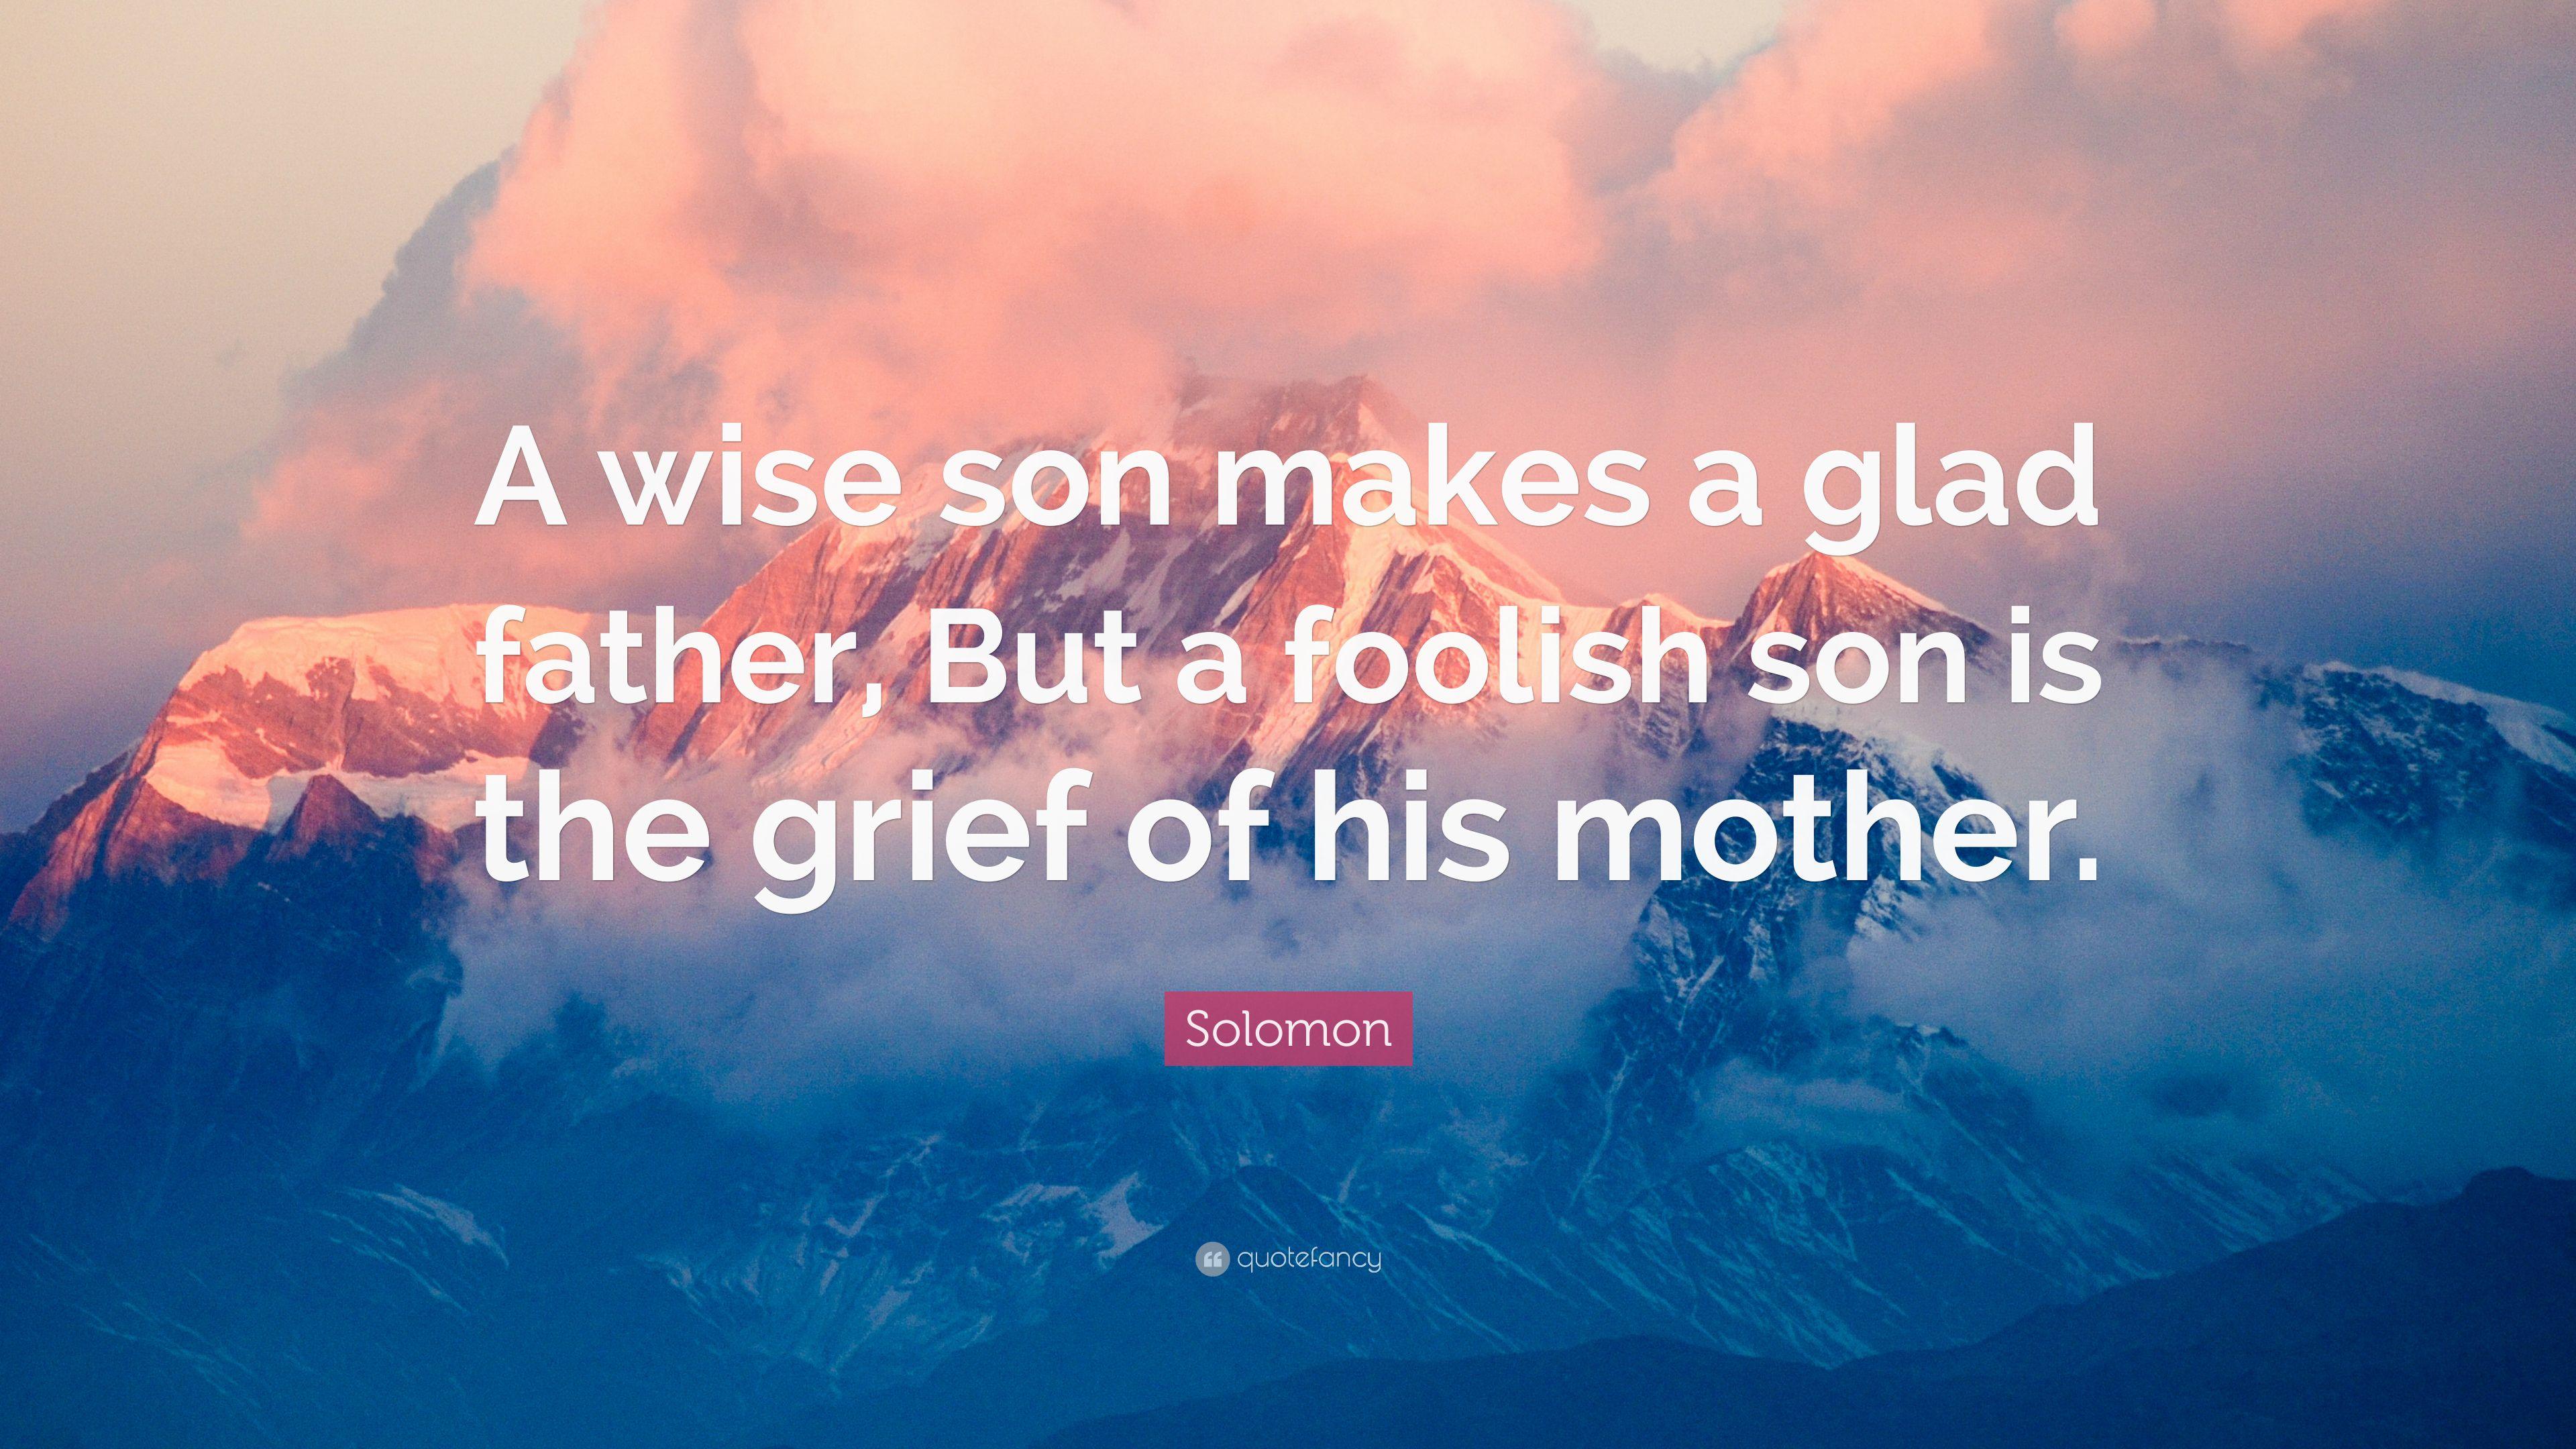 Solomon Quote: “A wise son makes a glad father, But a foolish son is